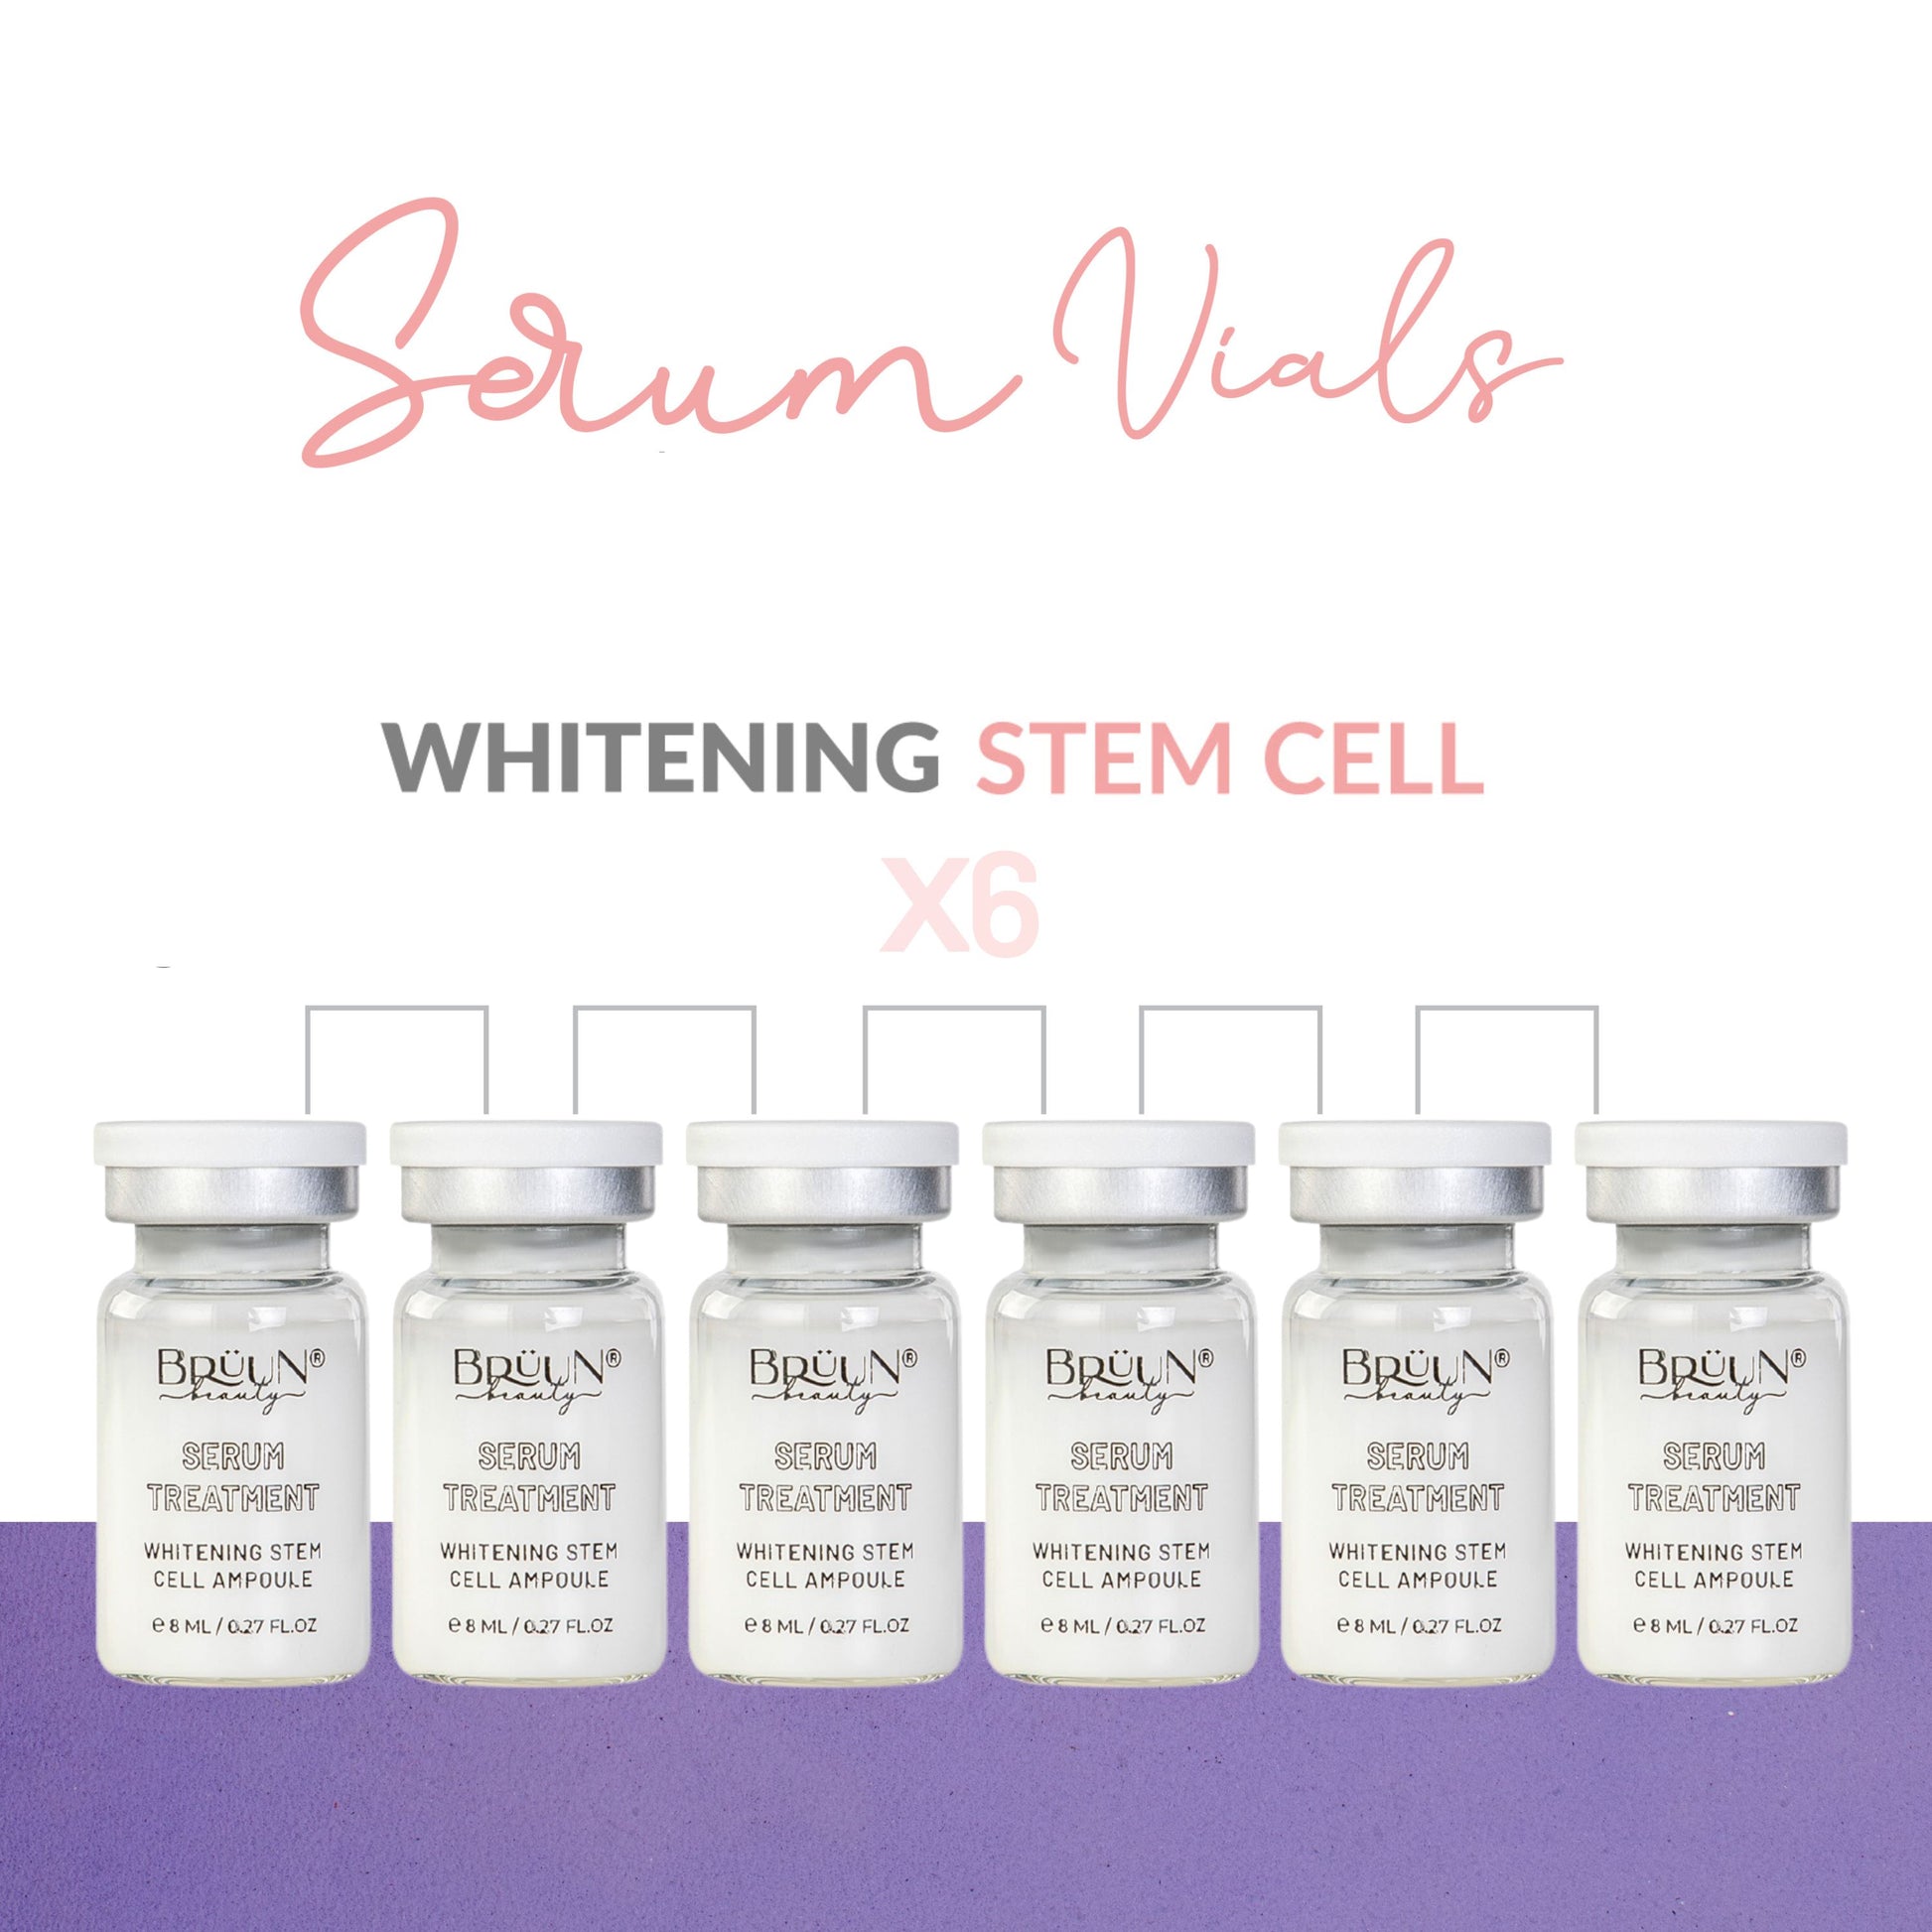 BB Serum Ampoule – A (Pack of 6) Whitening Stem Cell Ampoule for Stronger Lightning Effect Bruun Beauty 